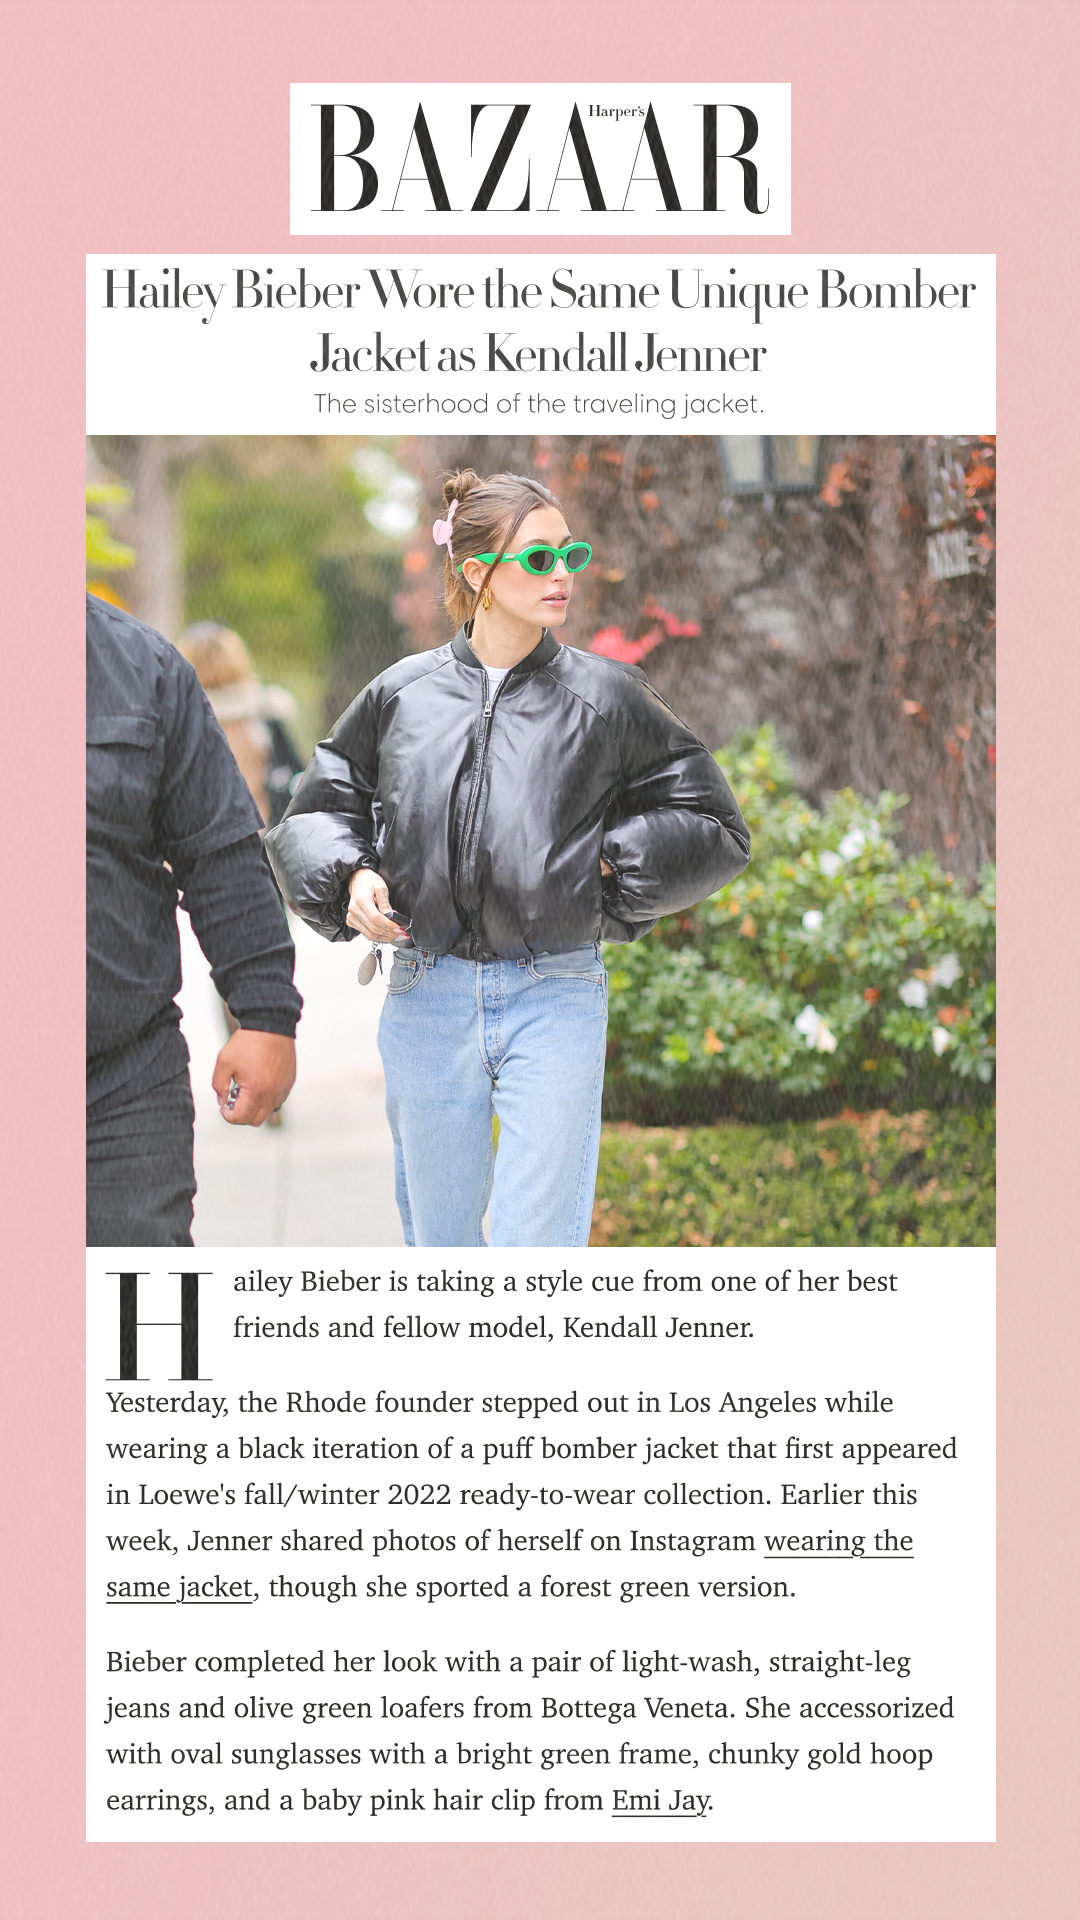 Hailey Bieber Wore the Same Unique Bomber Jacket as Kendall Jenner The sisterhood of the traveling jacket. Hailey Bieber is taking a style cue from one of her best friends and fellow model, Kendall Jenner. Yesterday, the Rhode founder stepped out in Los Angeles while wearing a black iteration of a puff bomber jacket that first appeared in Loewe's fall/winter 2022 ready-to-wear collection. Earlier this week, Jenner shared photos of herself on Instagram wearing the same jacket, though she sported a forest green version. Bieber completed her look with a pair of light-wash, straight-leg jeans and olive green loafers from Bottega Veneta. She accessorized with oval sunglasses with a bright green frame, chunky gold hoop earrings, and a baby pink hair clip from Emi Jay.